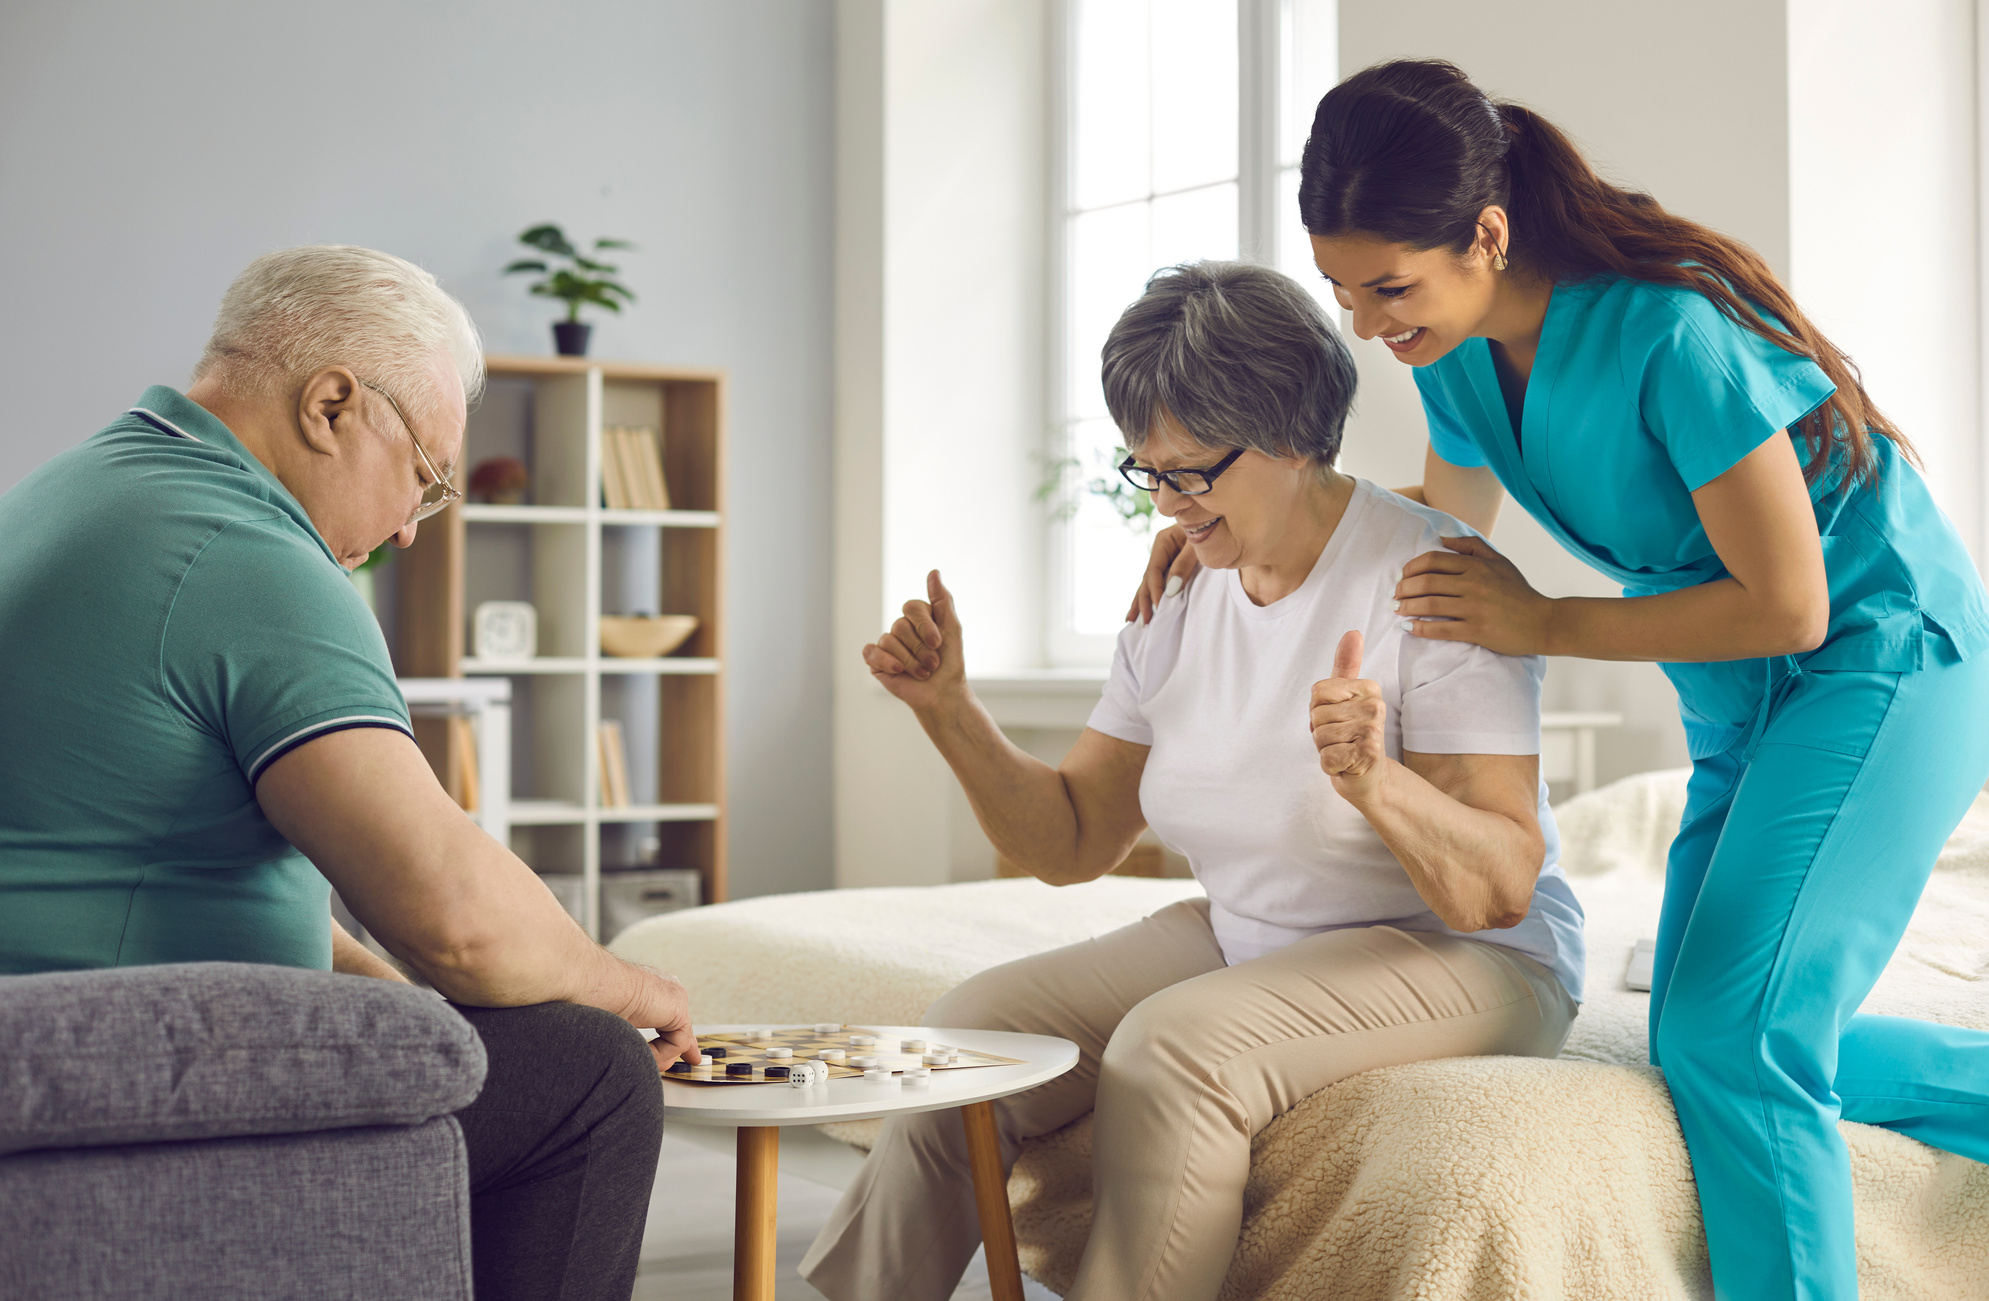 Supportive Care Giver Watching Couple of Her Happy Senior Patients Play Checkers